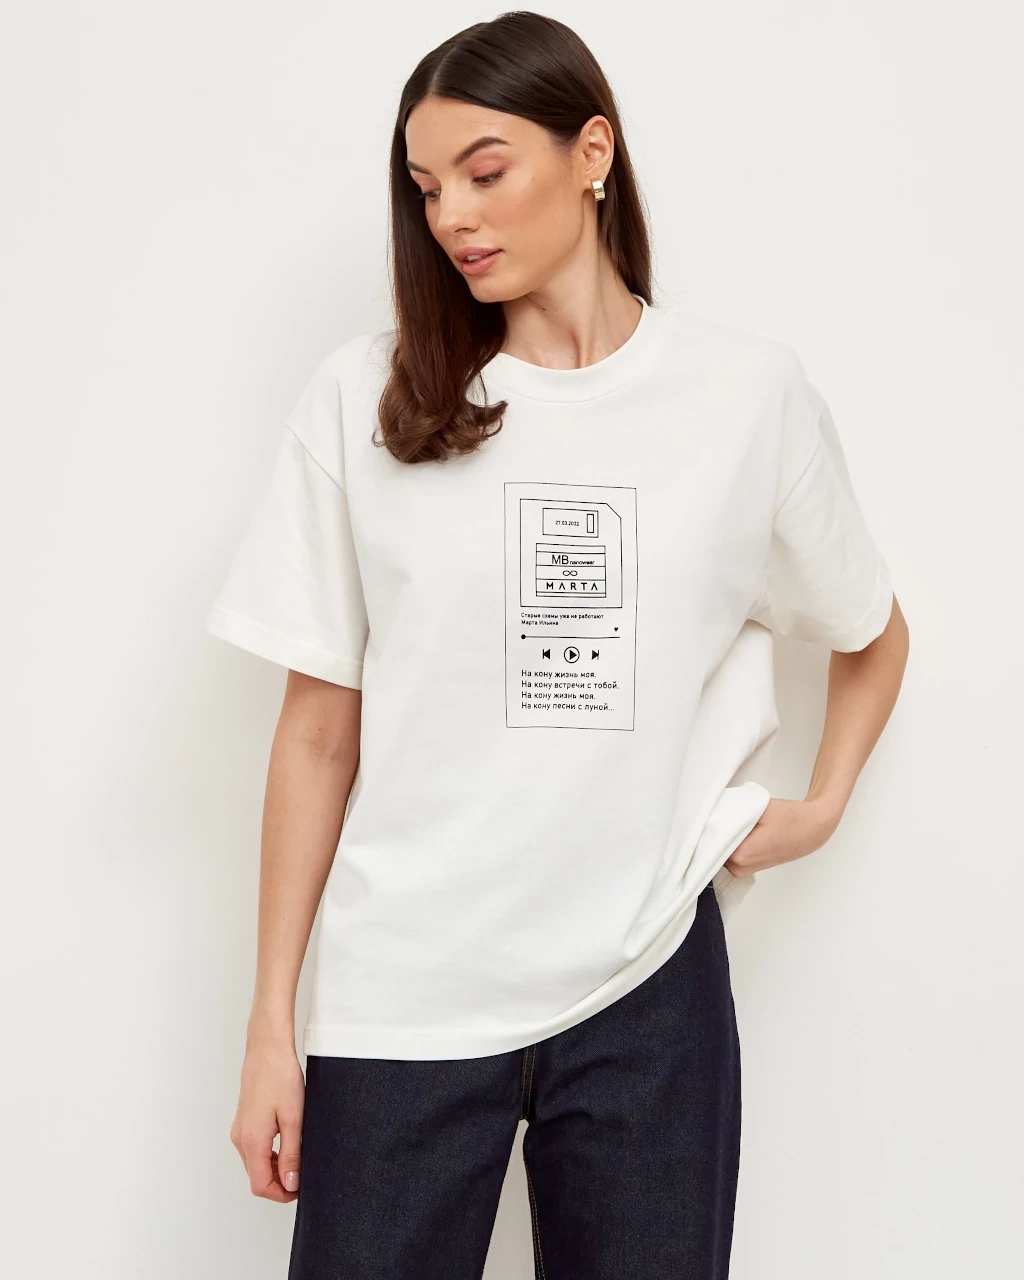 Thick jersey oversize T-shirt with a label and iron-on transfer milk